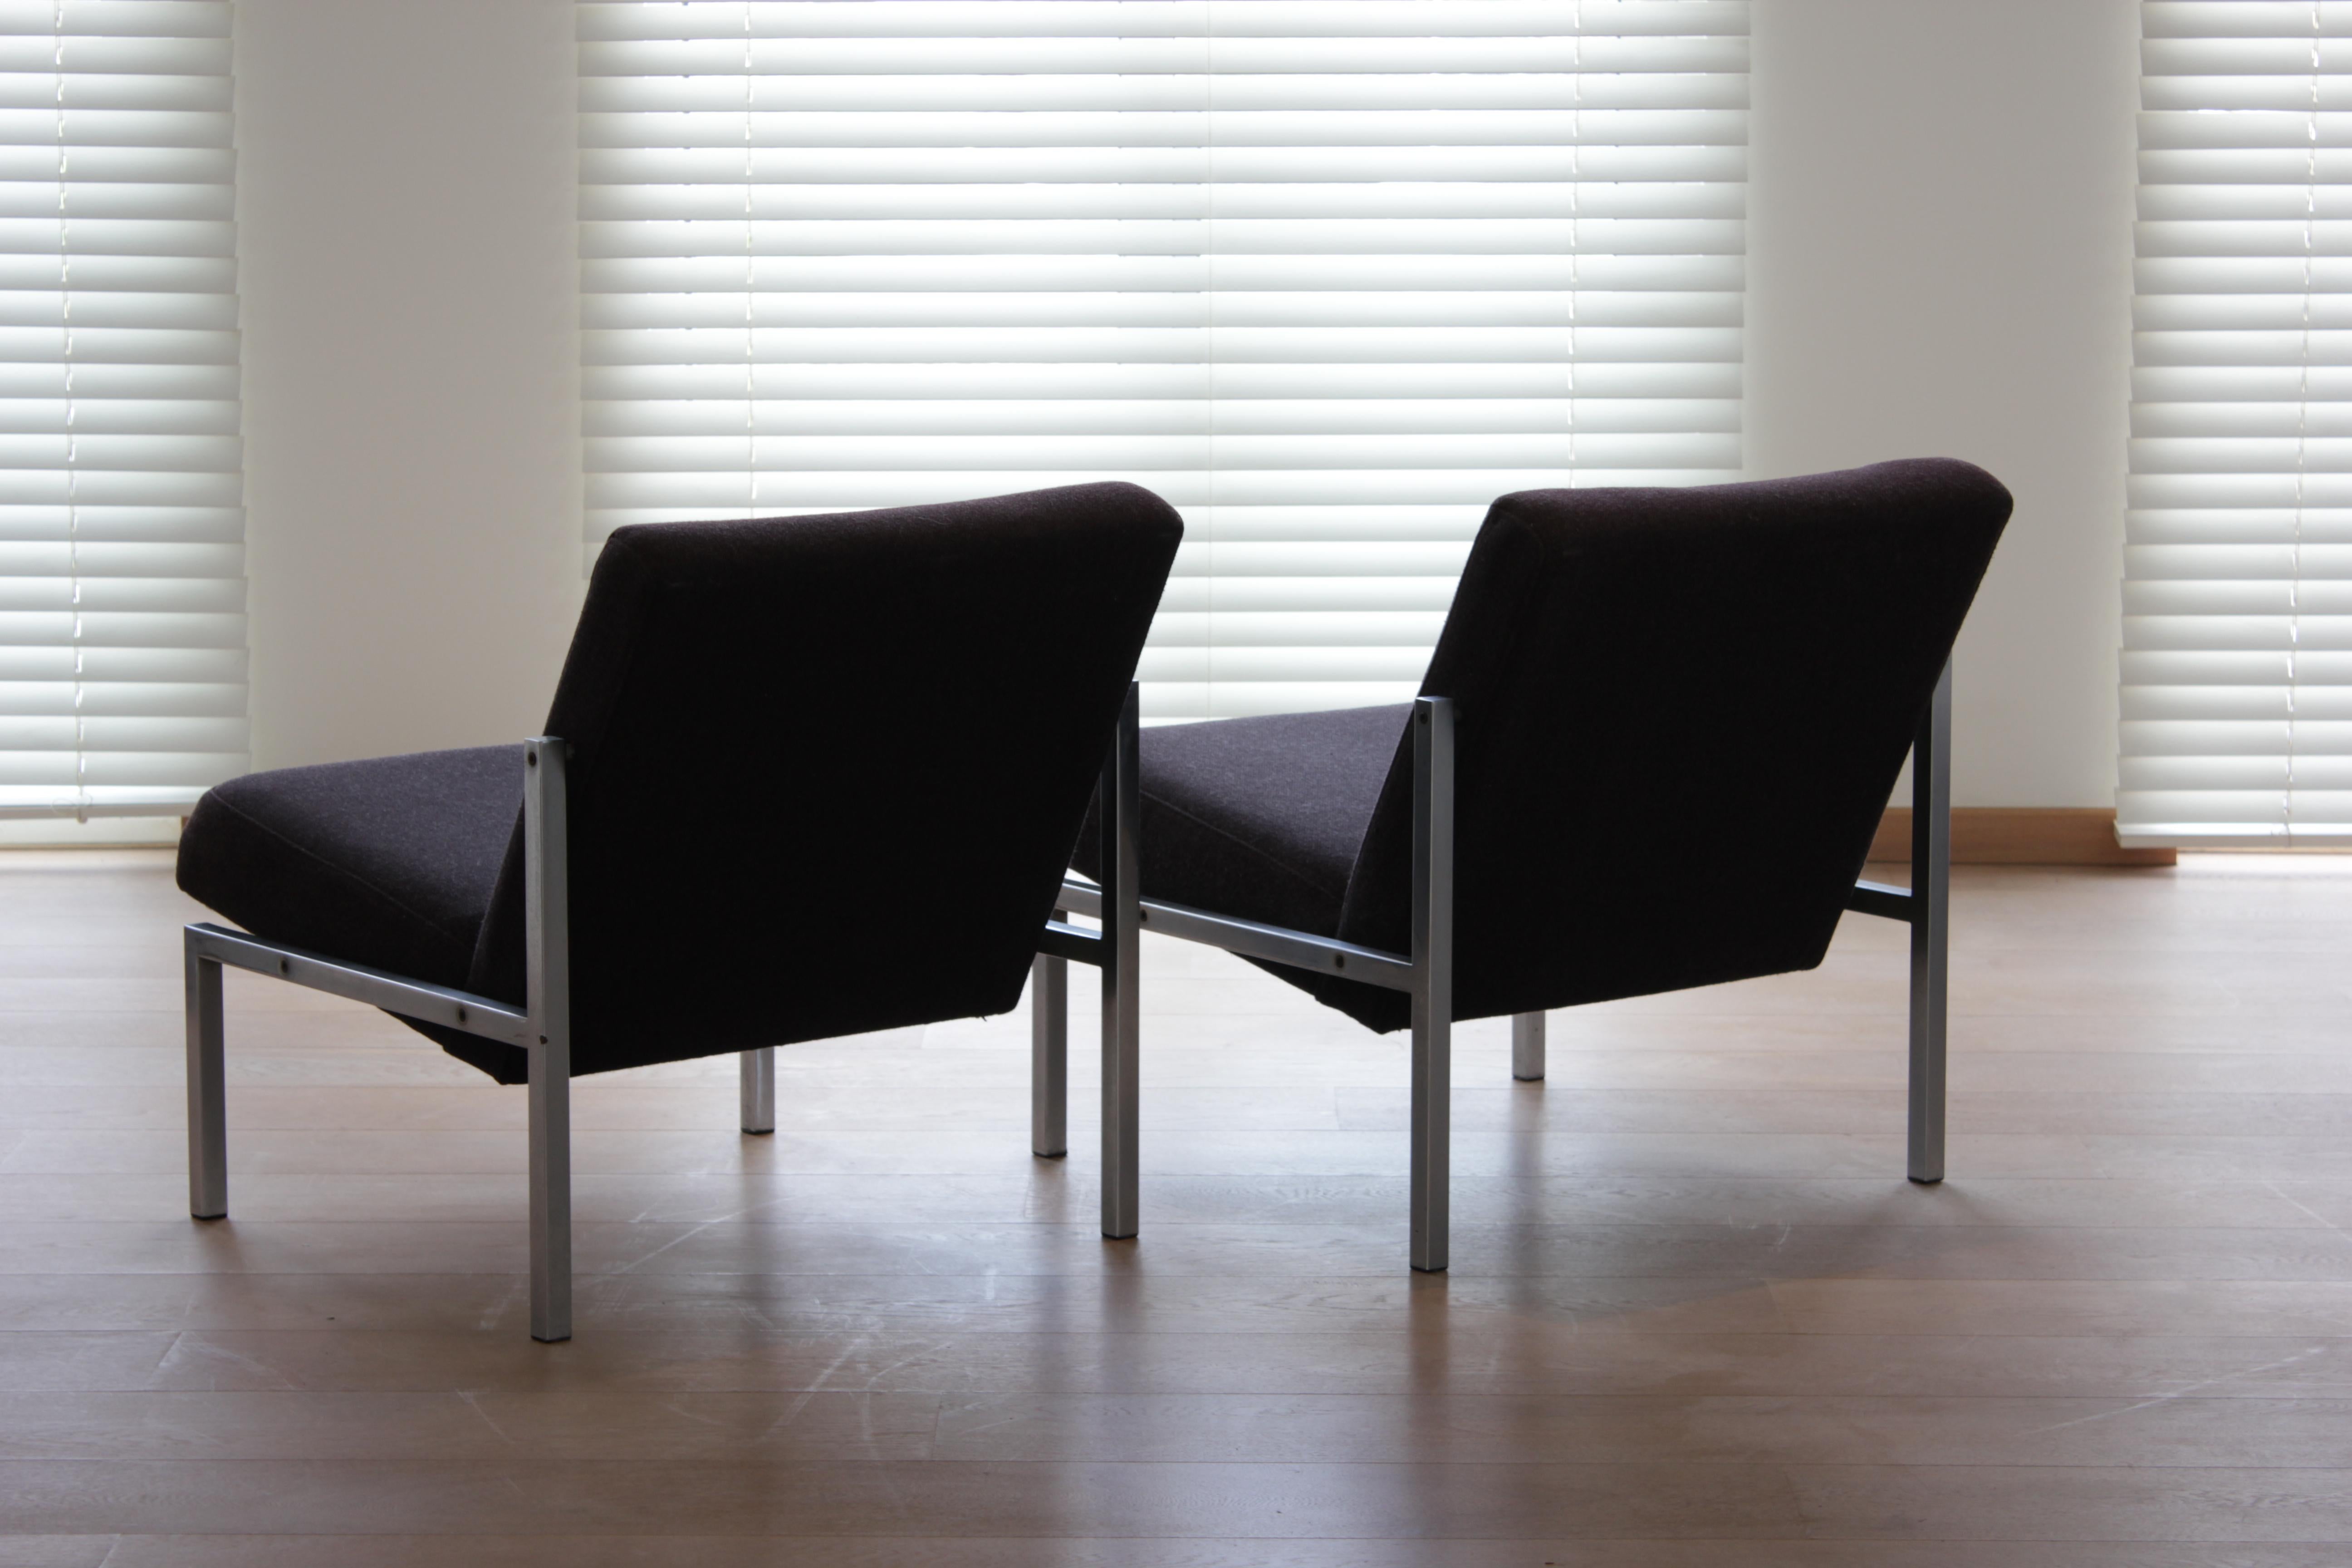 Pair of SZ11 Lounge Chairs by Martin Visser for 't Spectrum, 1960s In Good Condition For Sale In Brugge, BE